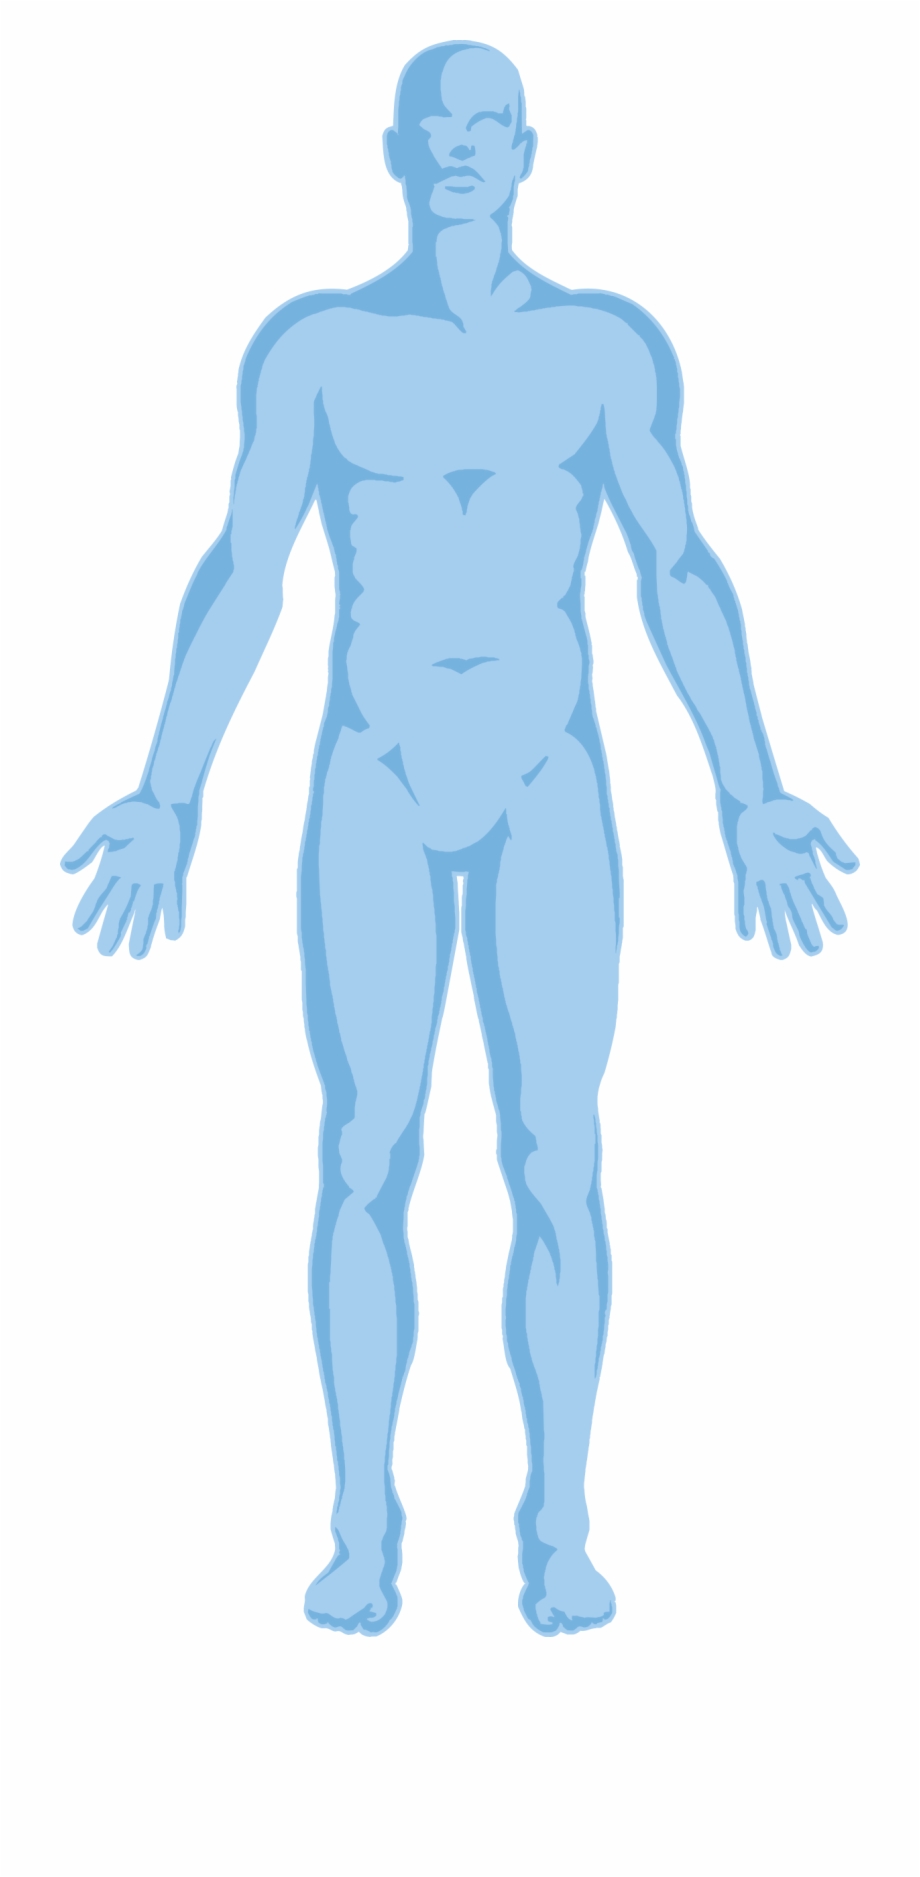 Body Body Outline Transparent Background